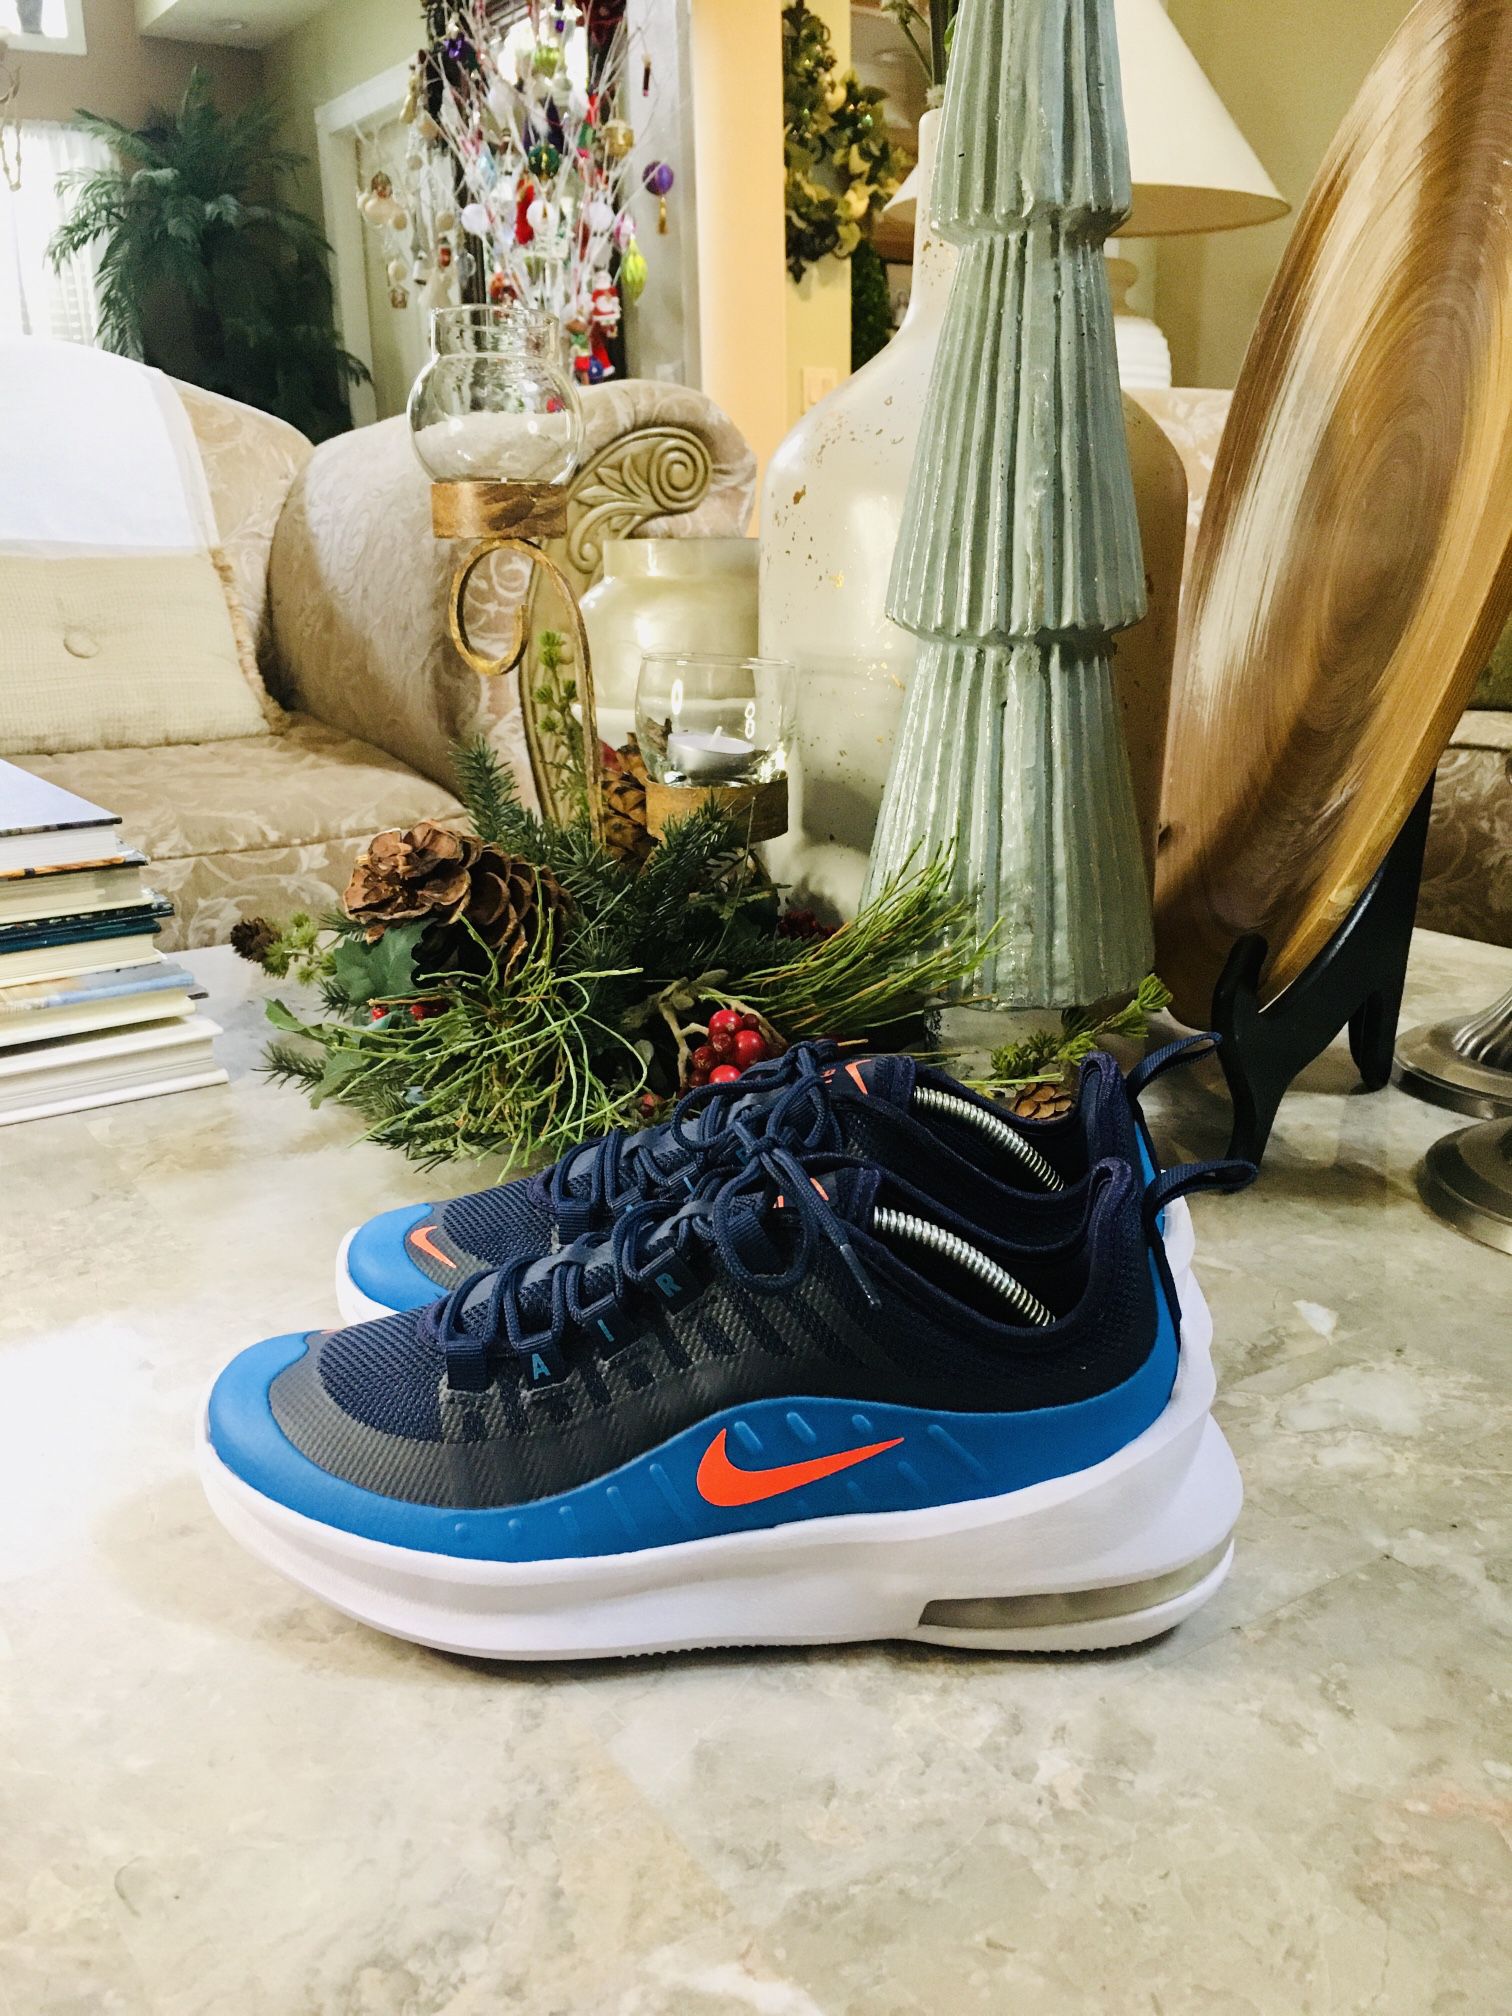 NEW Nike Air Max Axis Navy Blue Running Shoes AH5222 402 - SIZE 6Y /   WOMENS for Sale in Anaheim, CA - OfferUp